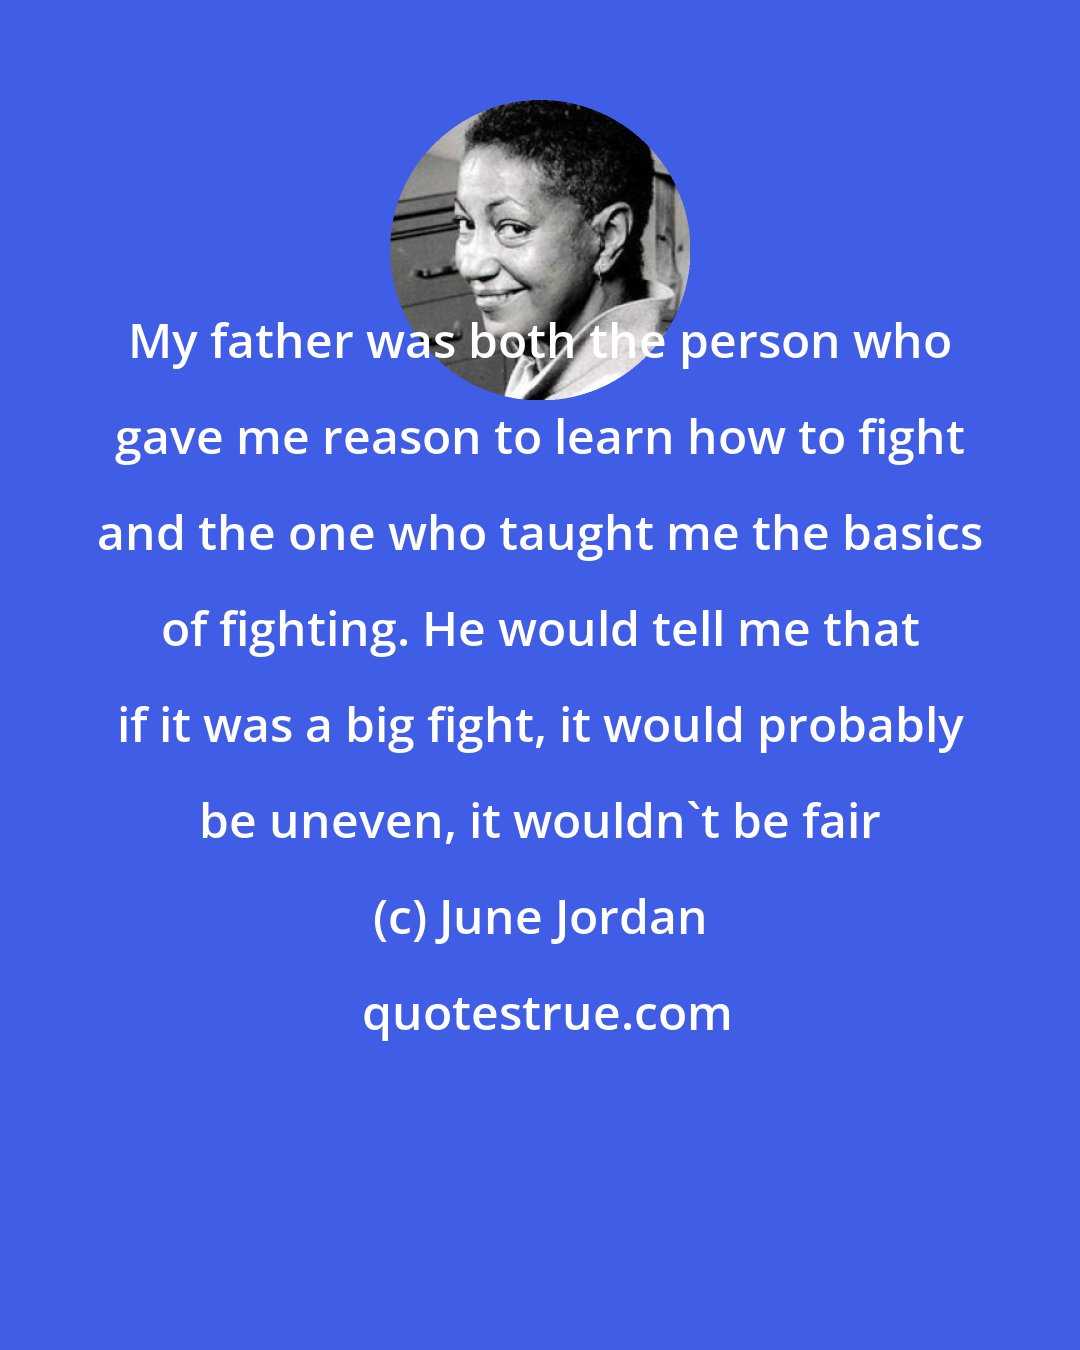 June Jordan: My father was both the person who gave me reason to learn how to fight and the one who taught me the basics of fighting. He would tell me that if it was a big fight, it would probably be uneven, it wouldn't be fair